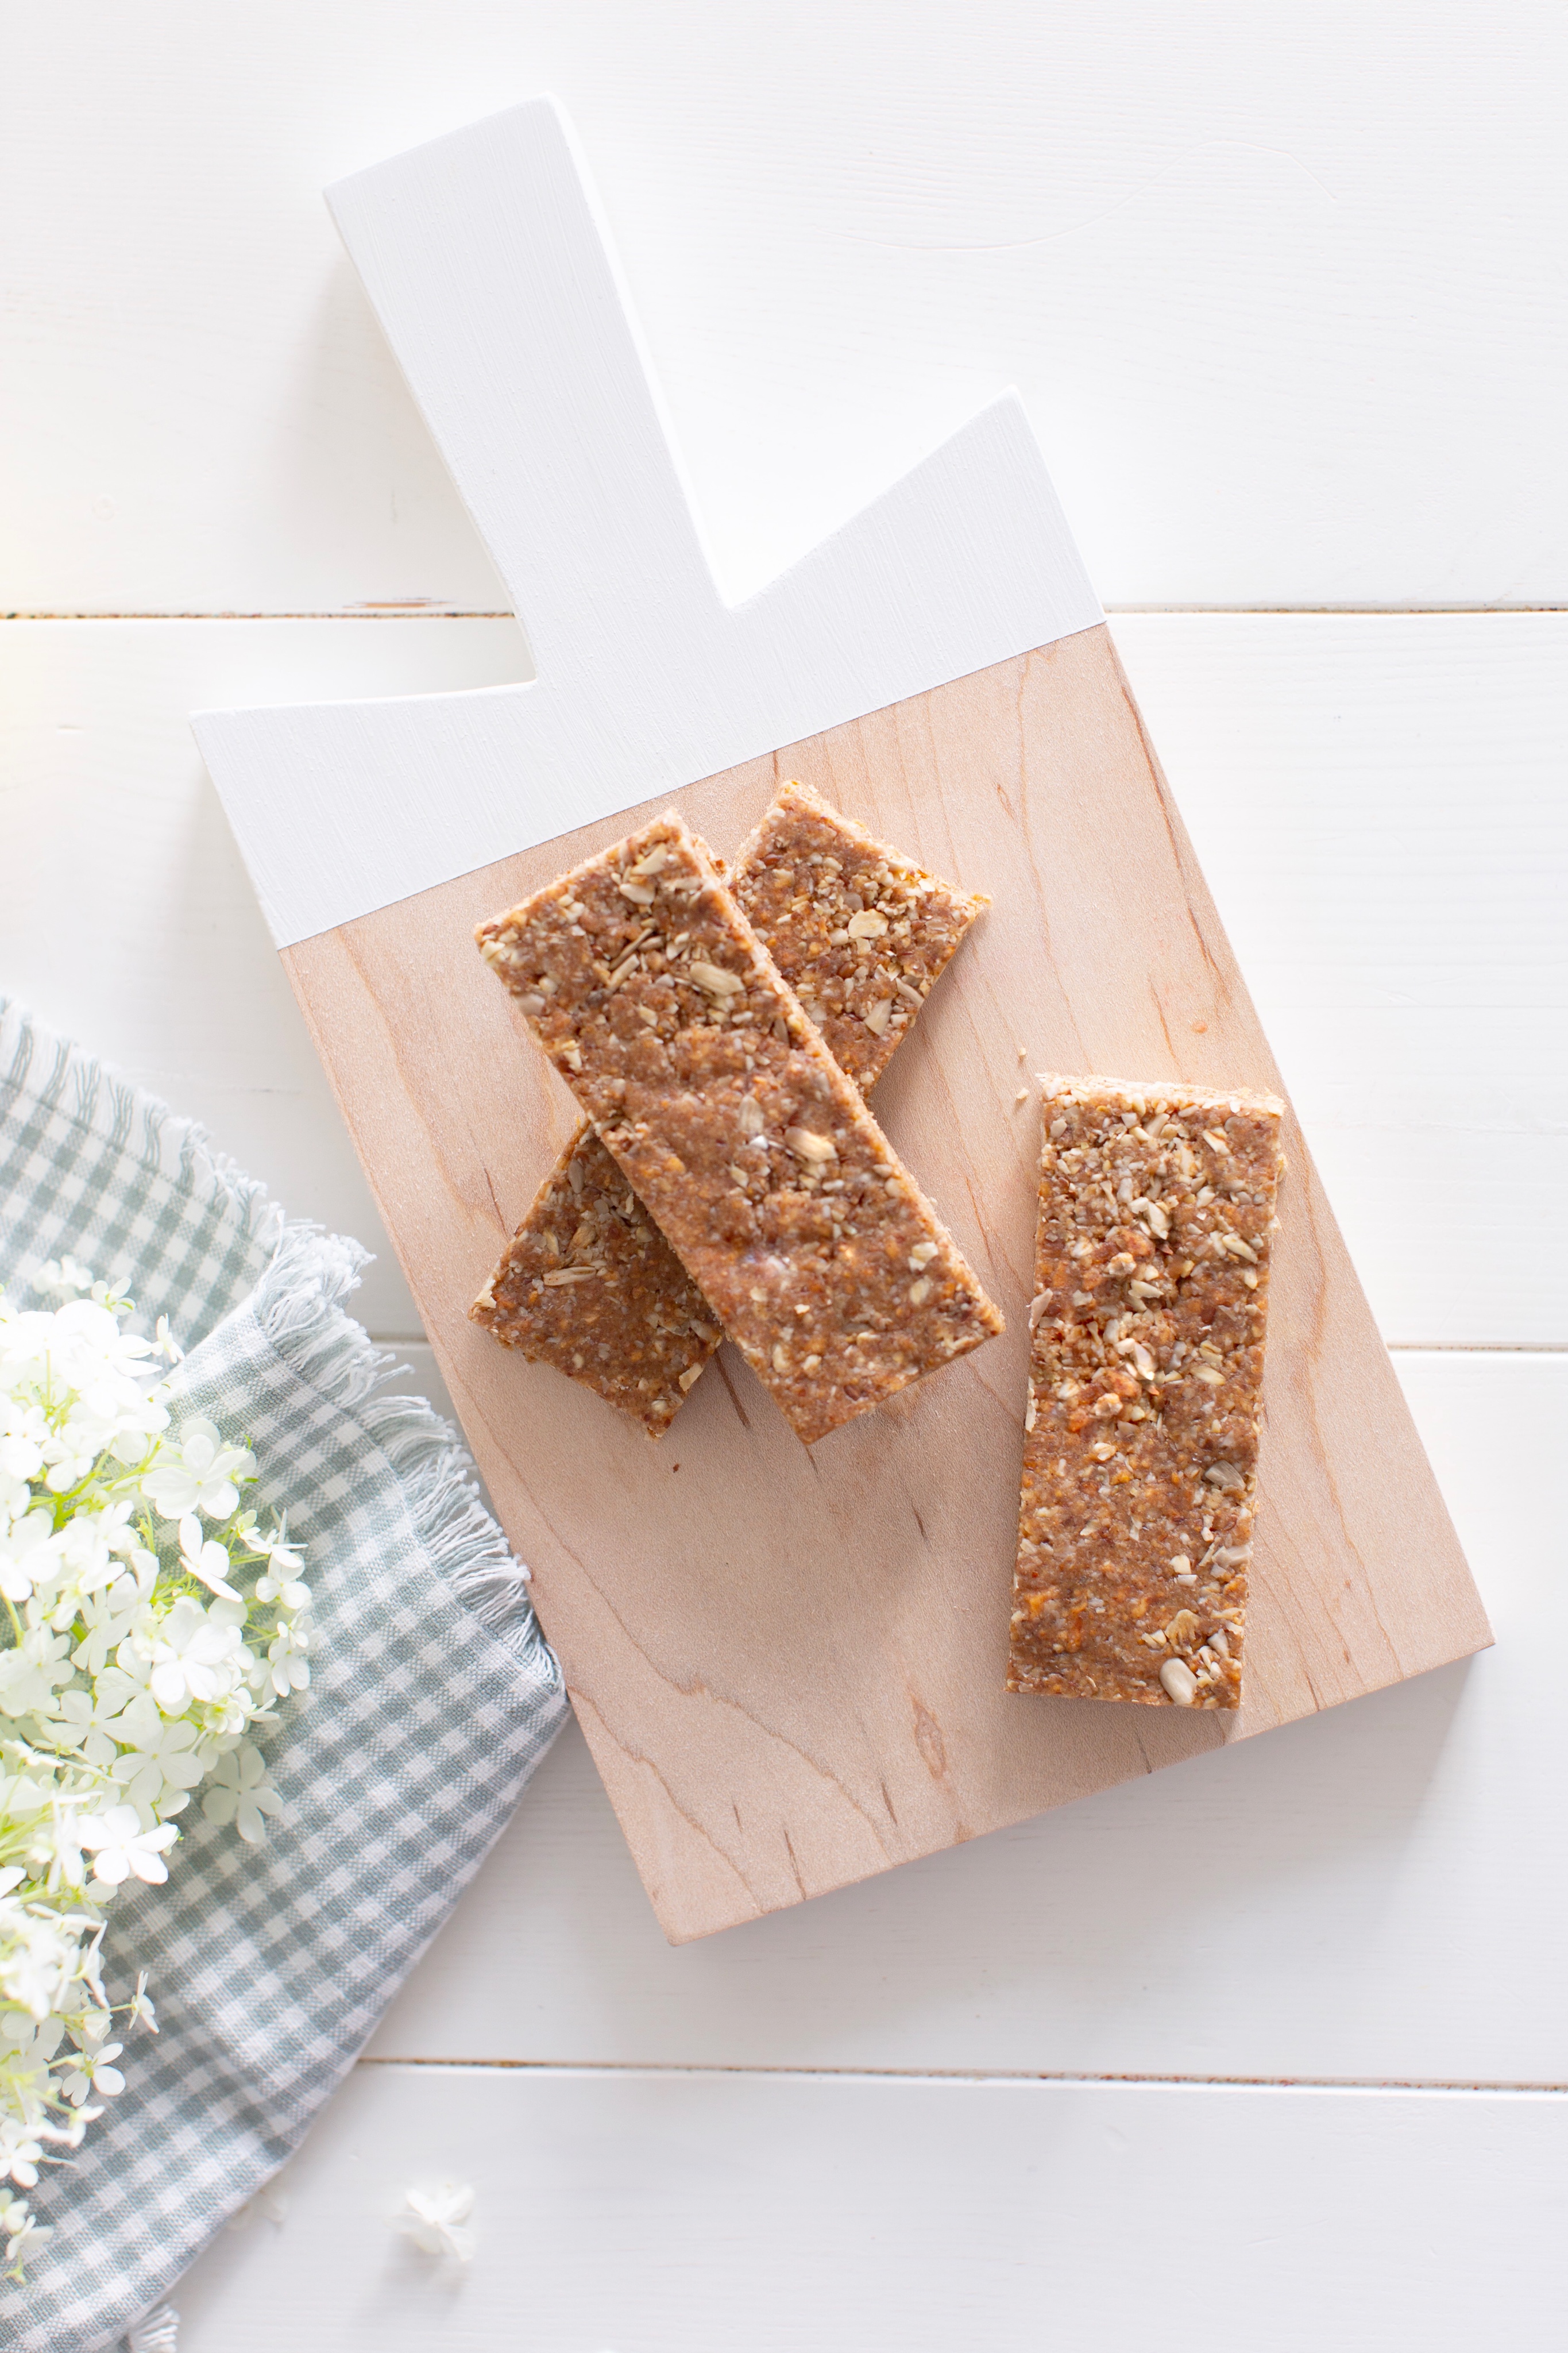 Apple Oat Bars that are nut free, no bake, gluten free and taste amazing! Made out of wholesome foods including dried apples, oats and sunflower seeds, they are perfect for school lunches!